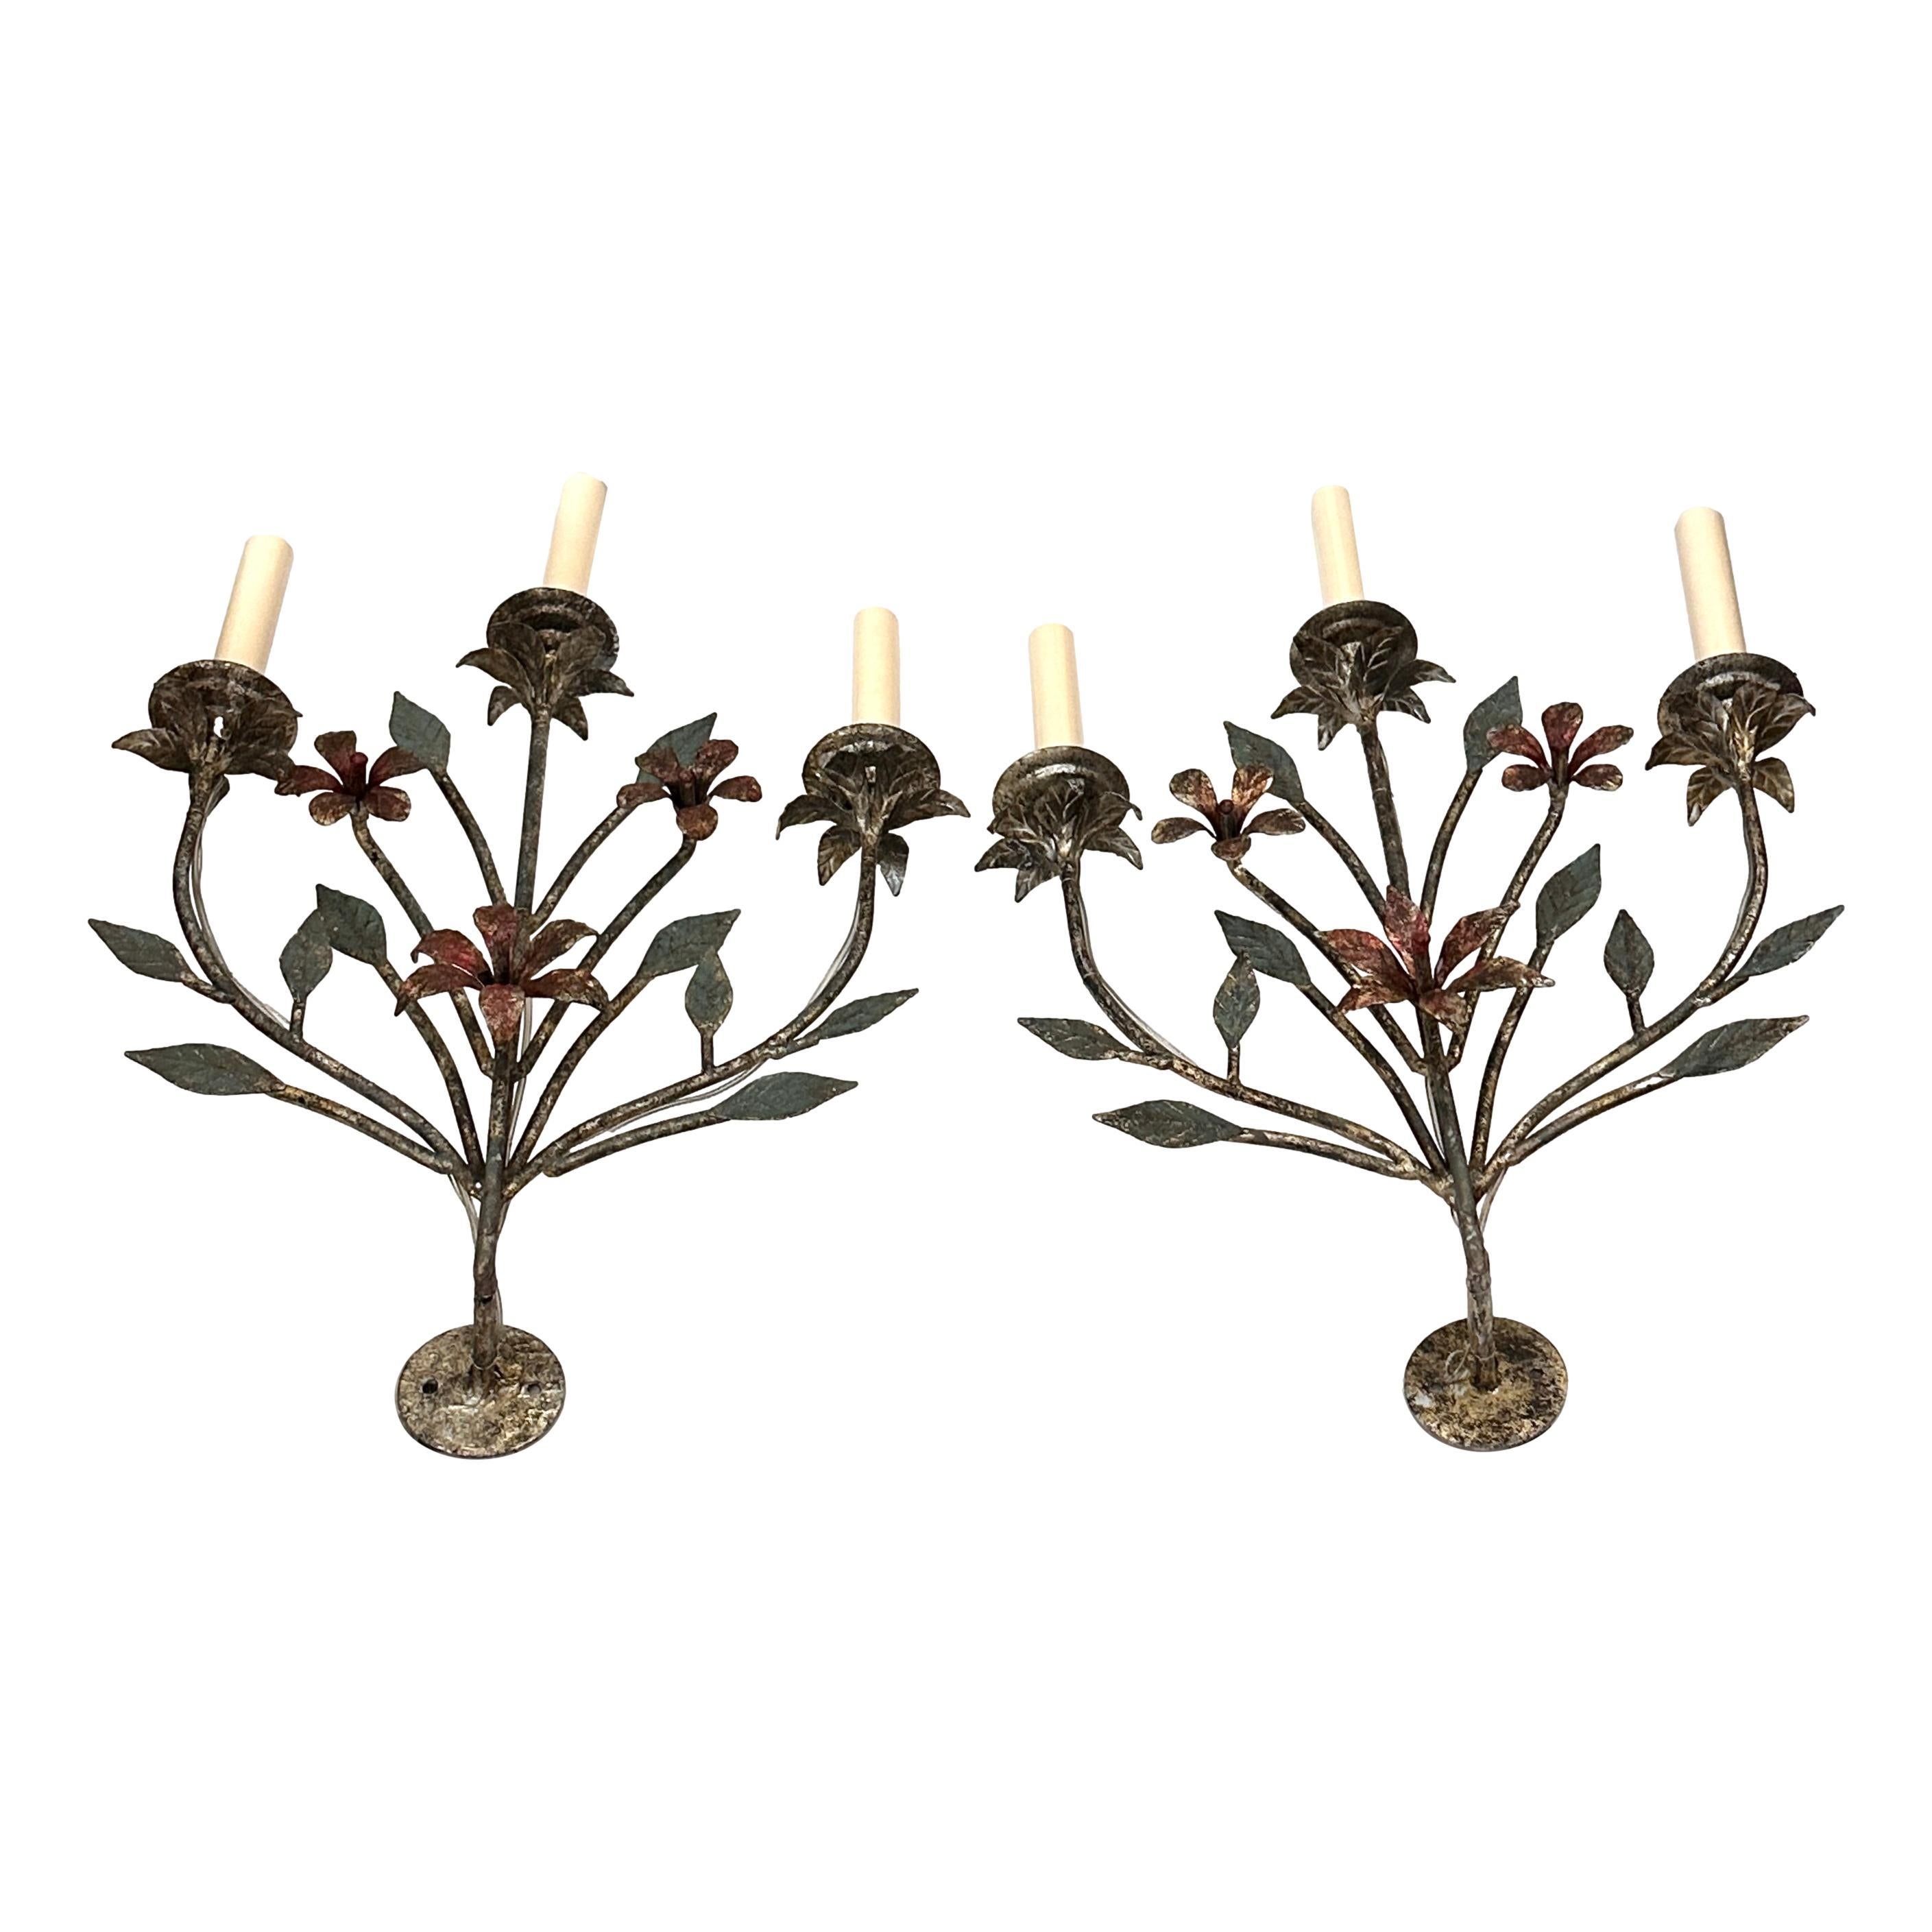 Pair of circa 1940's Italian silver leaf foliage sconces with painted finish and original patina.

Measurements:
Height: 21.5